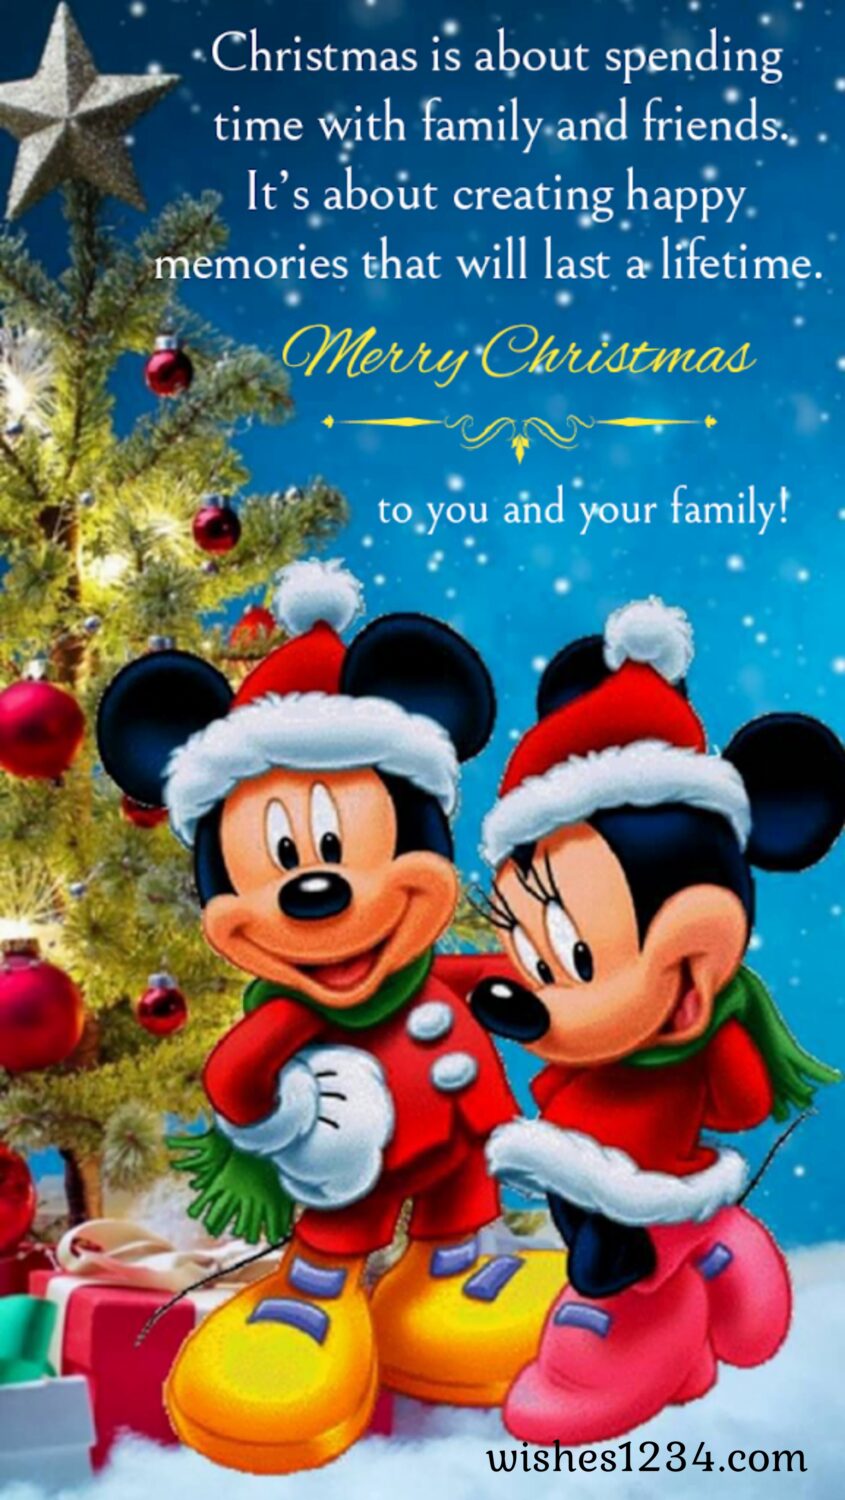 Mickey and Minnie wishing christmas, Merry Christmas Quotes & short wishes.